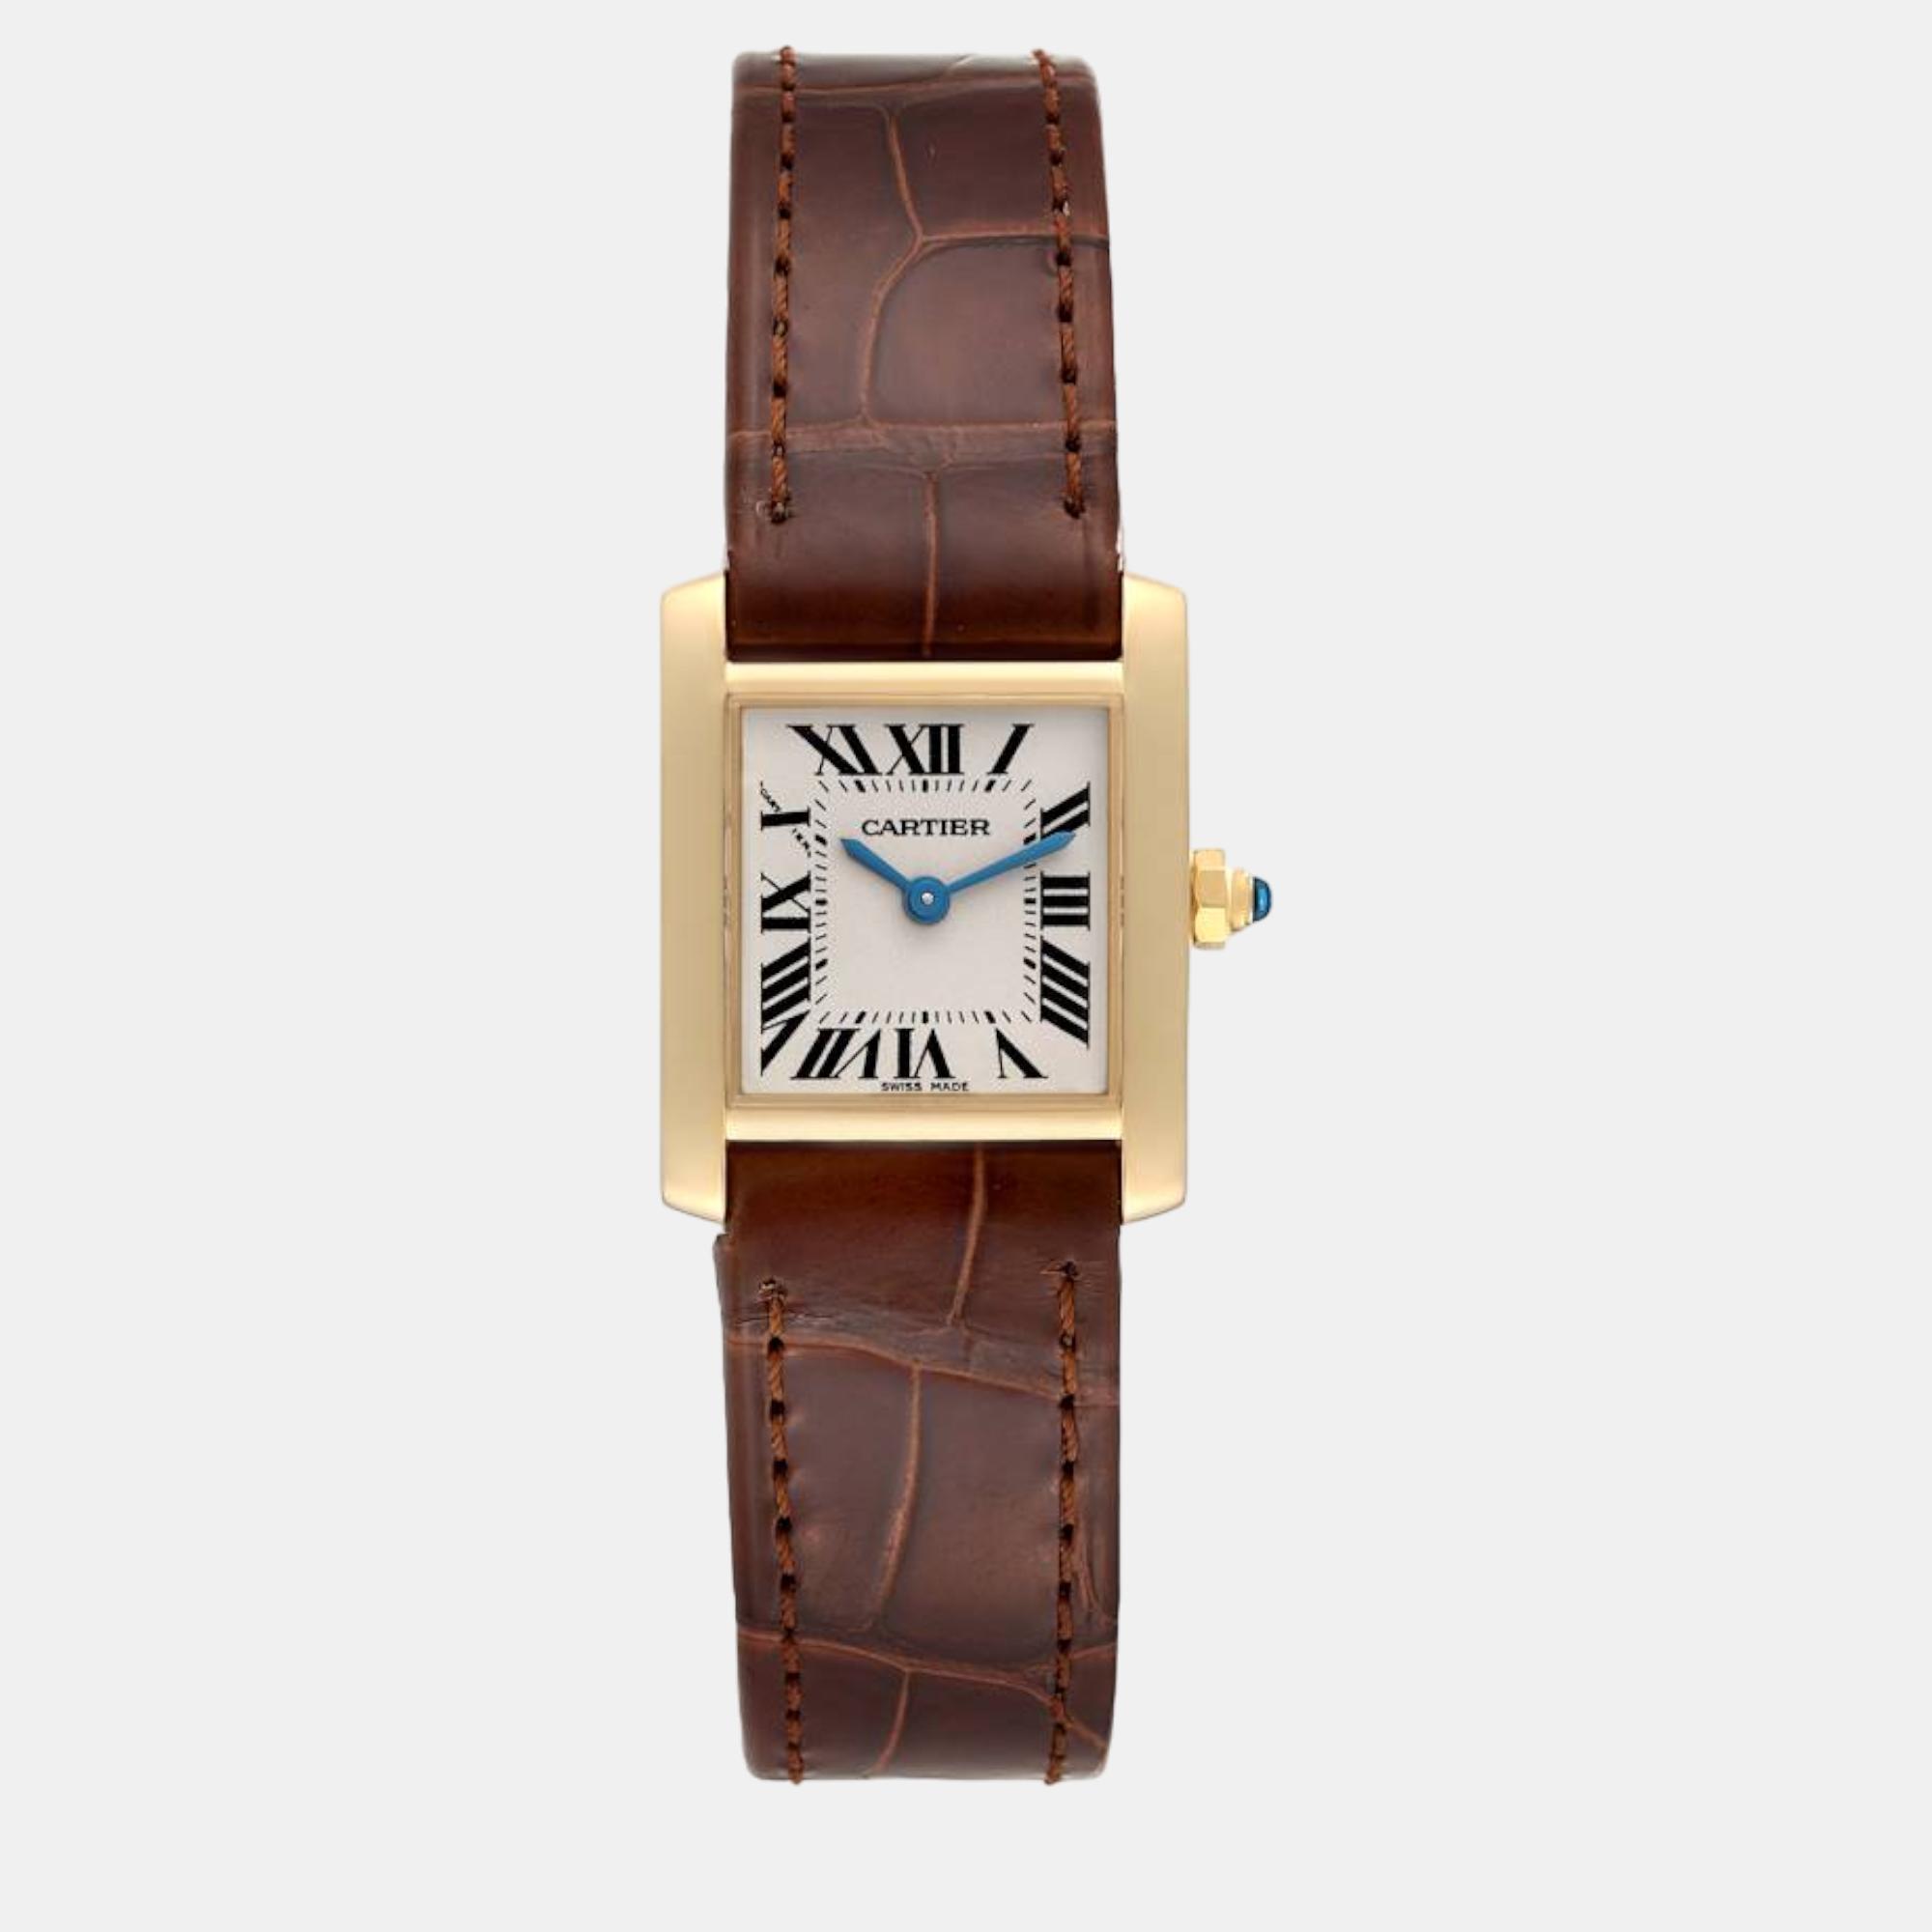 Cartier tank francaise yellow gold brown strap ladies watch 20 mm